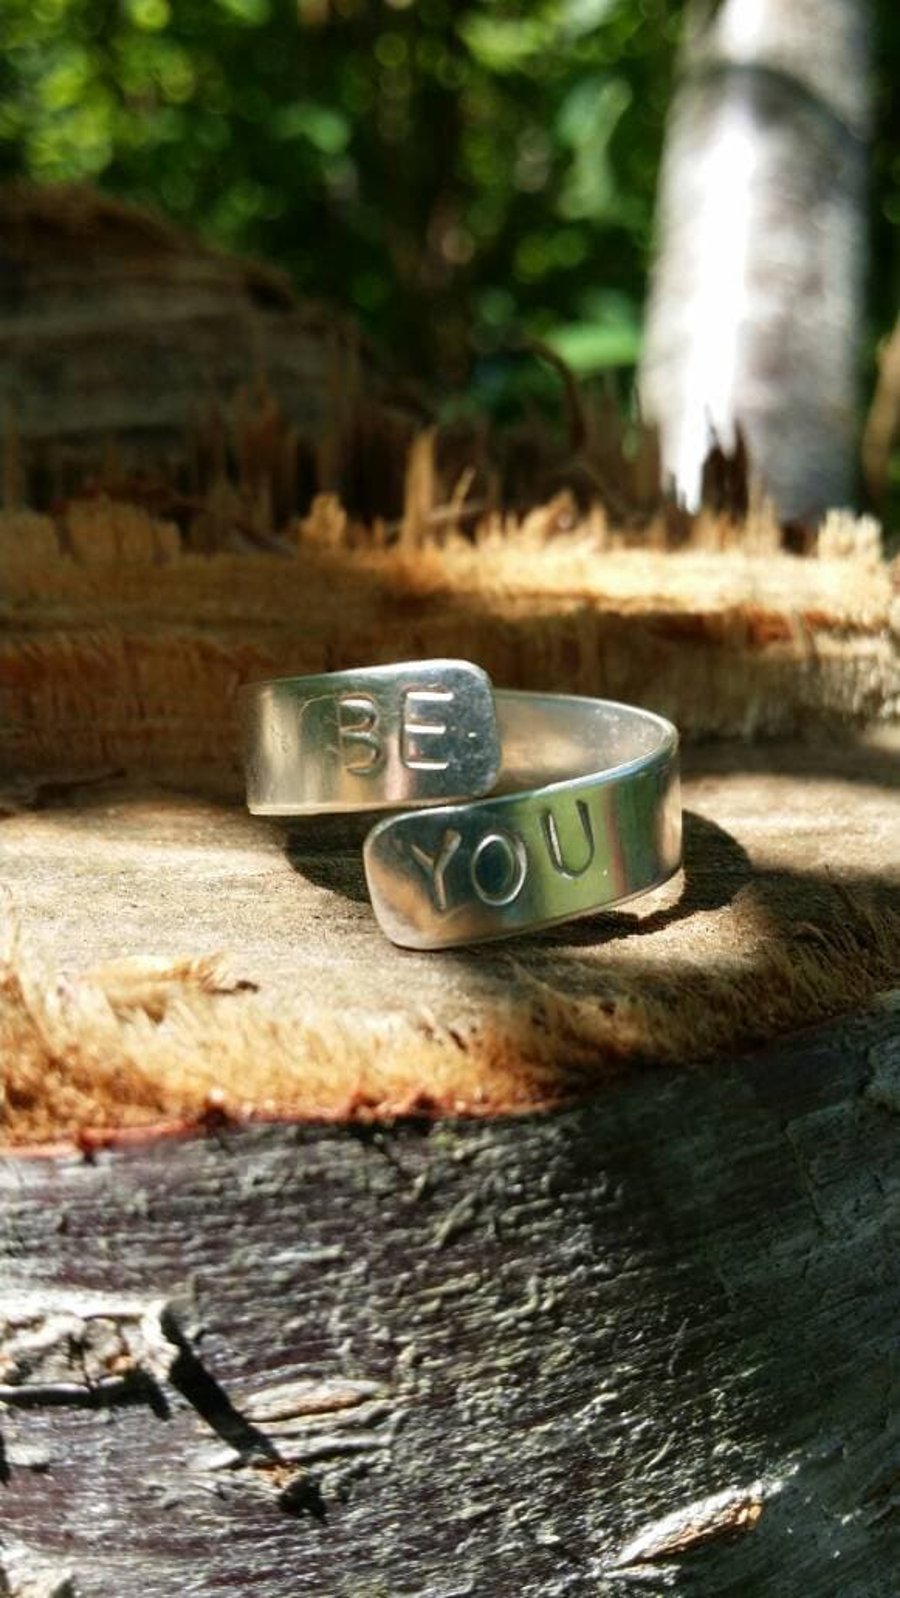 'Be you' stamped silver ring, sterling silver wrap ring. Adjustable ring. 